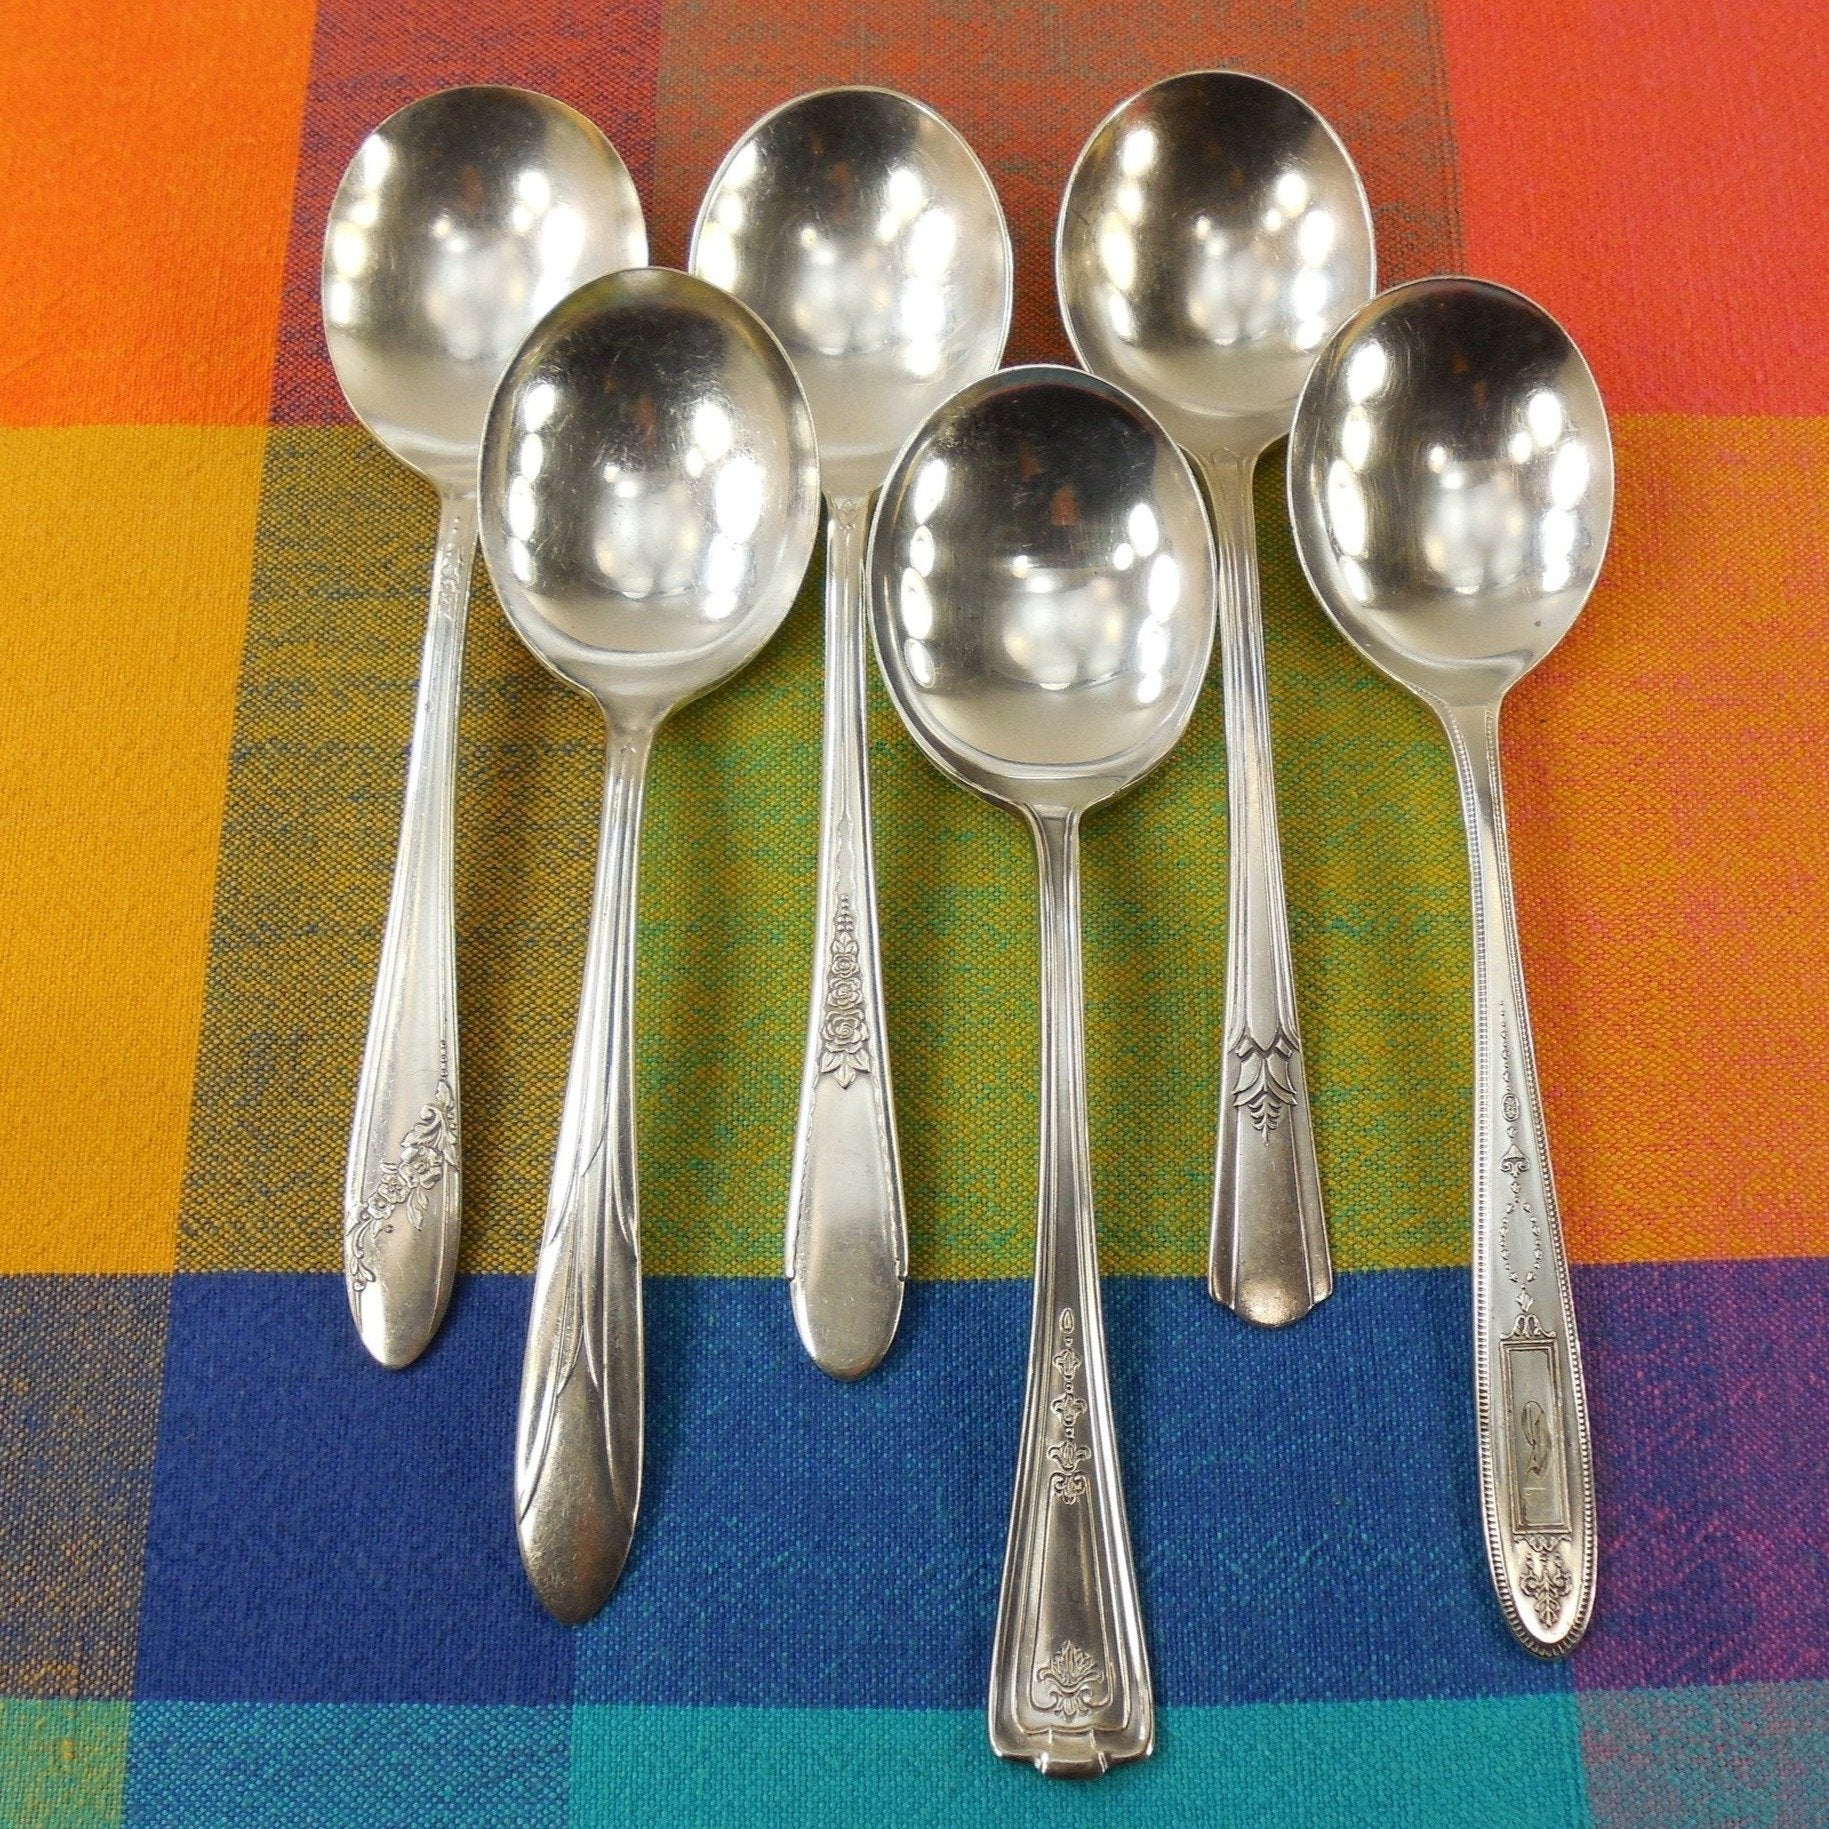 Vintage Mismatched Silverware - 6 Set Silverplate Gumbo Soup Spoons